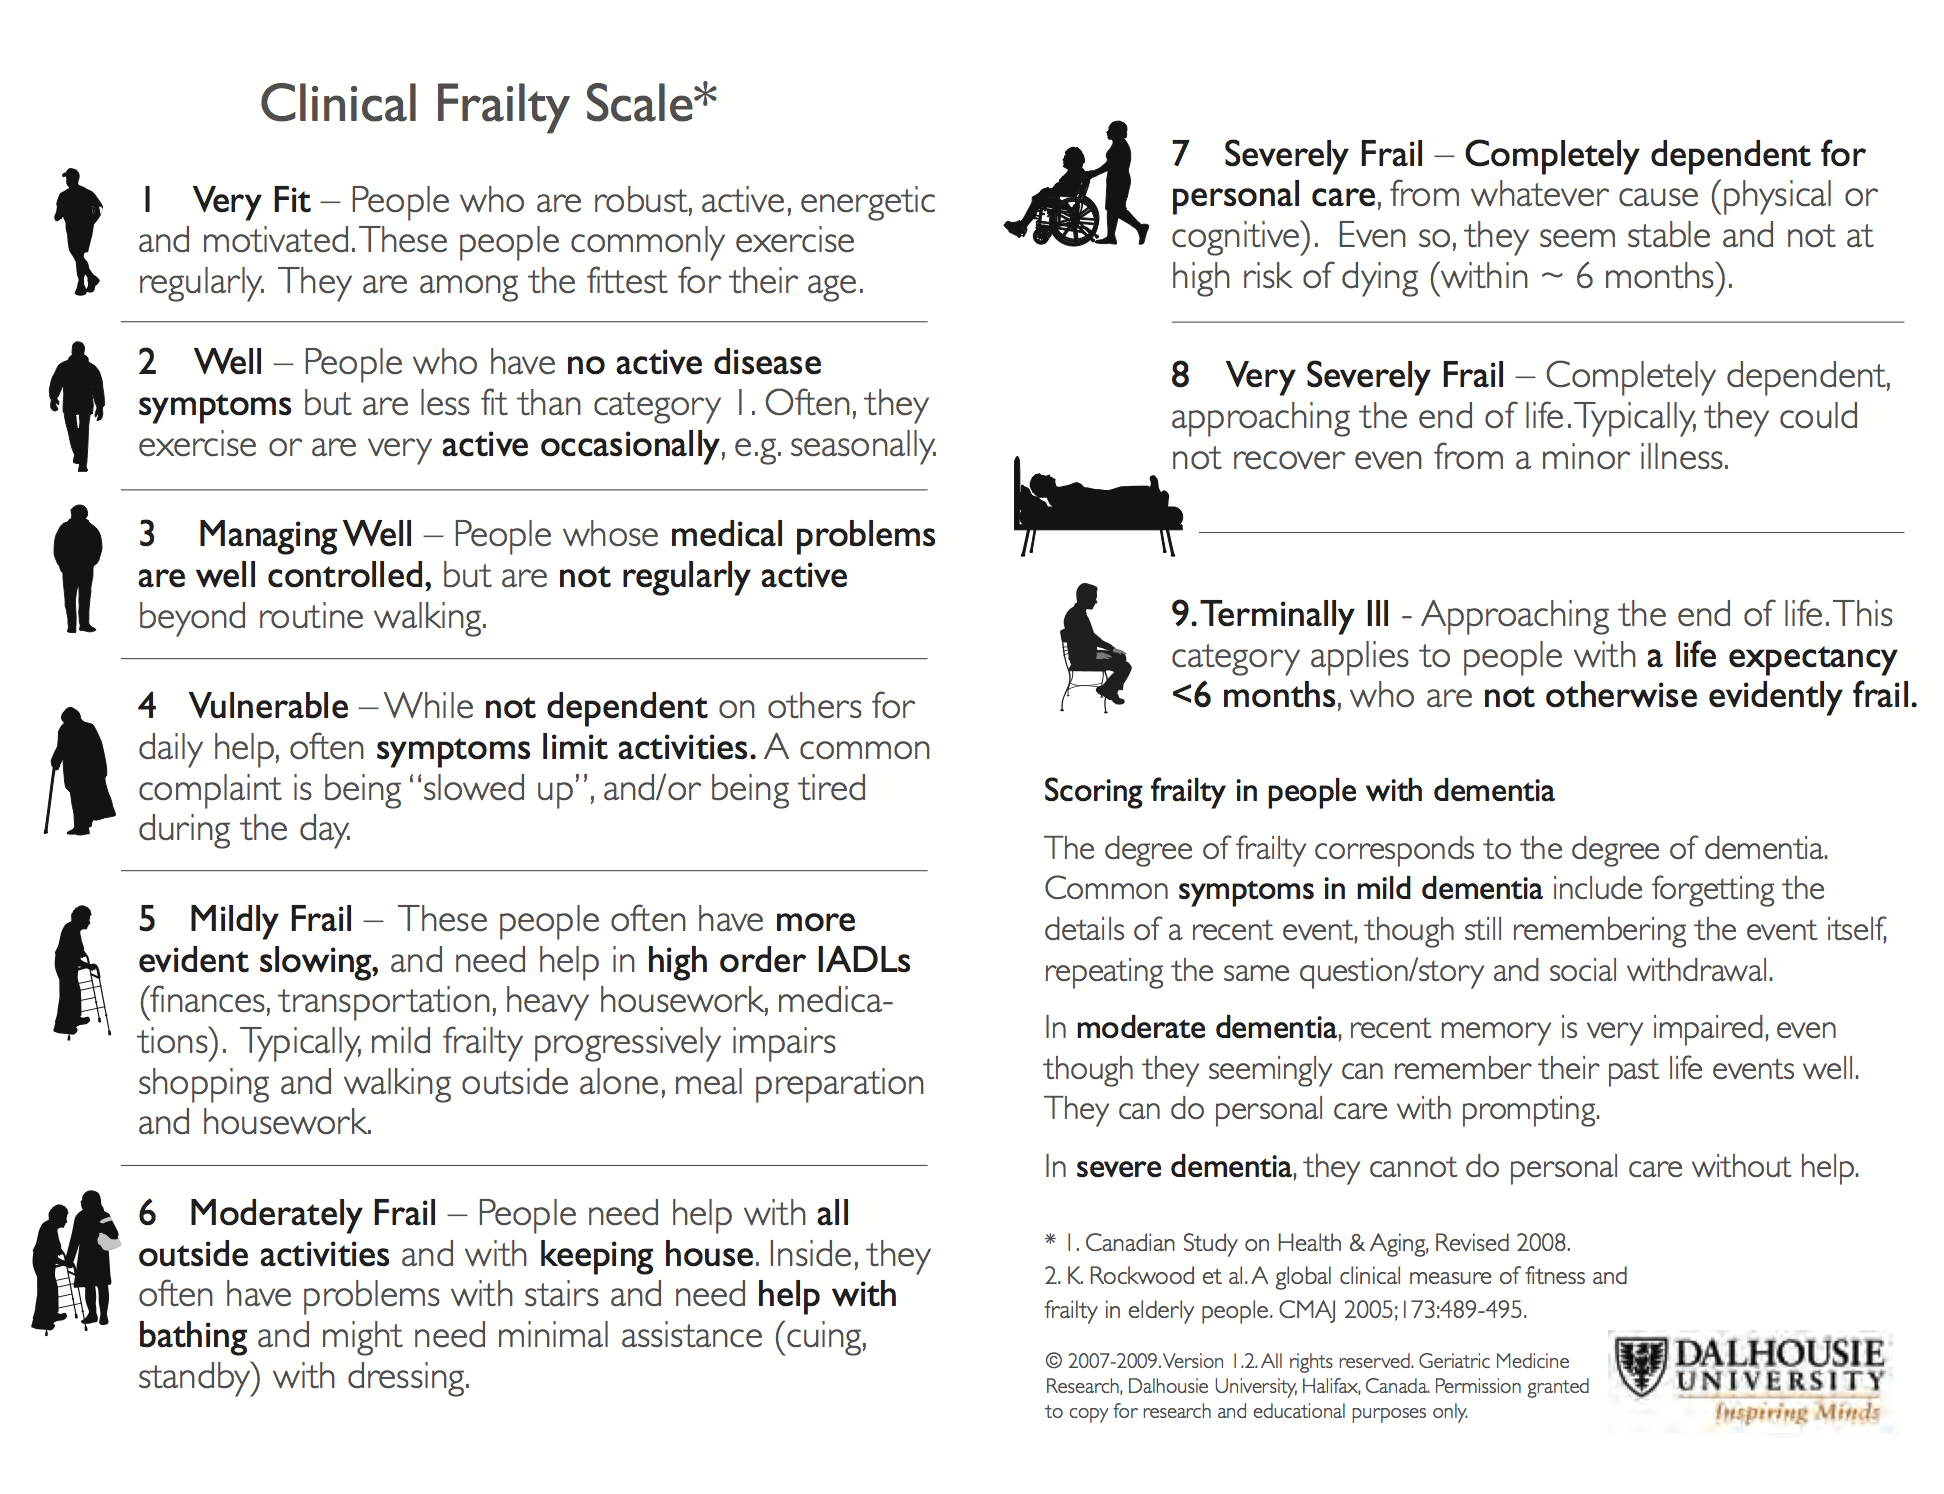 The Frailty Myth by Colette Dowling